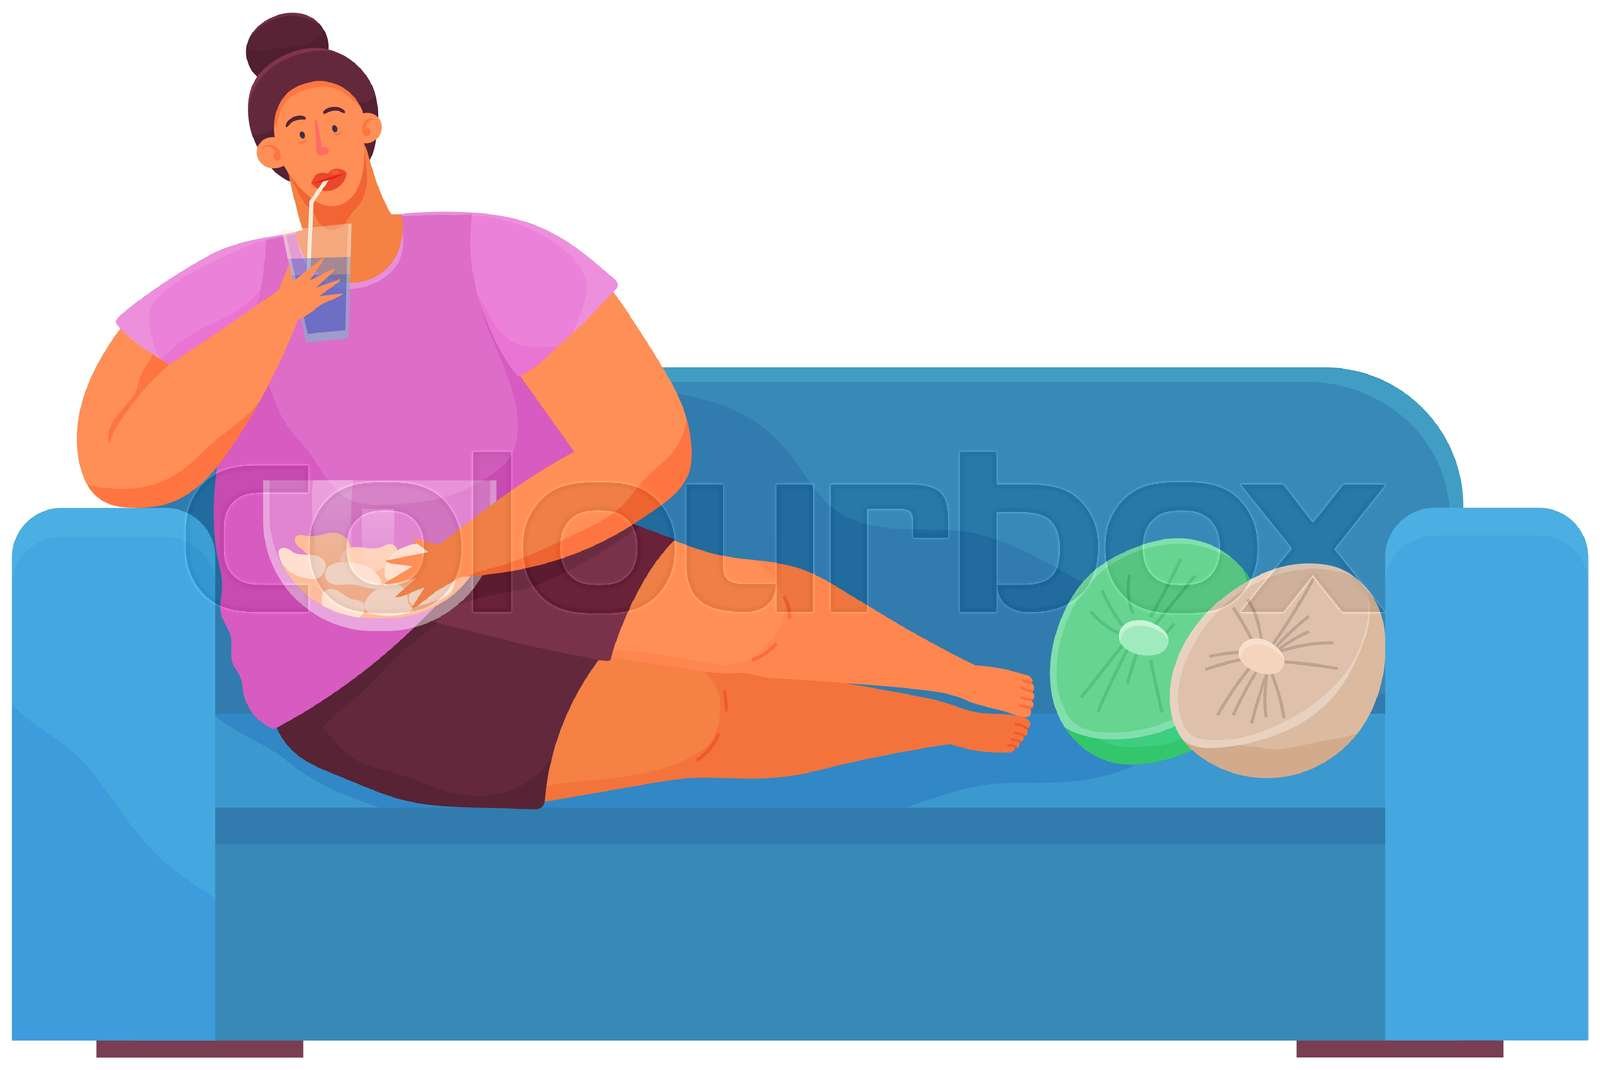 abdullahi khalif recommends fat woman on couch pic